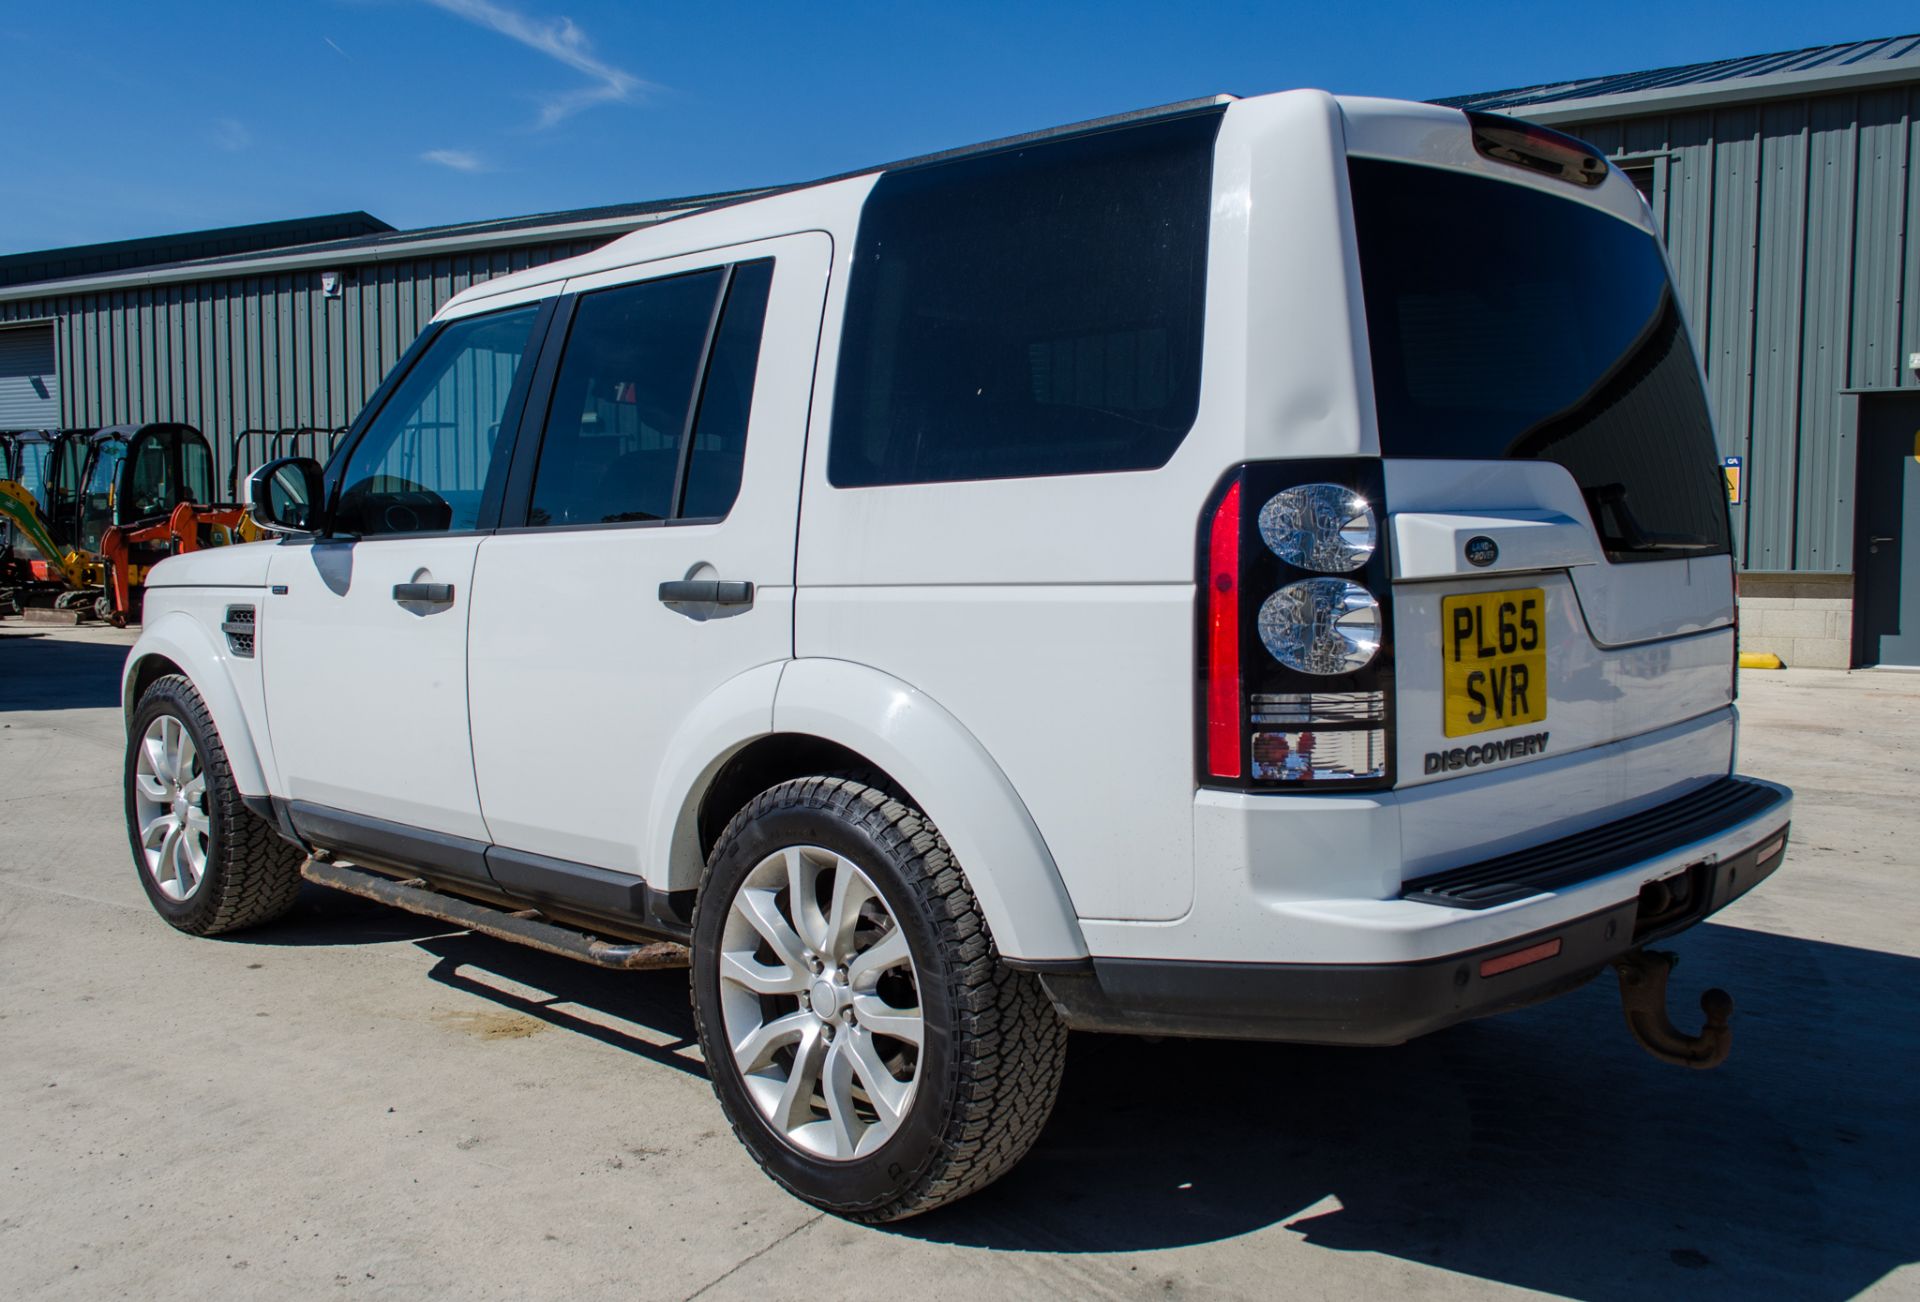 Land Rover Discovery 4 3.0 SE SDV6 Commercial 4x4 utility vehicle Reg No: PL65 SVR Date of - Image 3 of 32